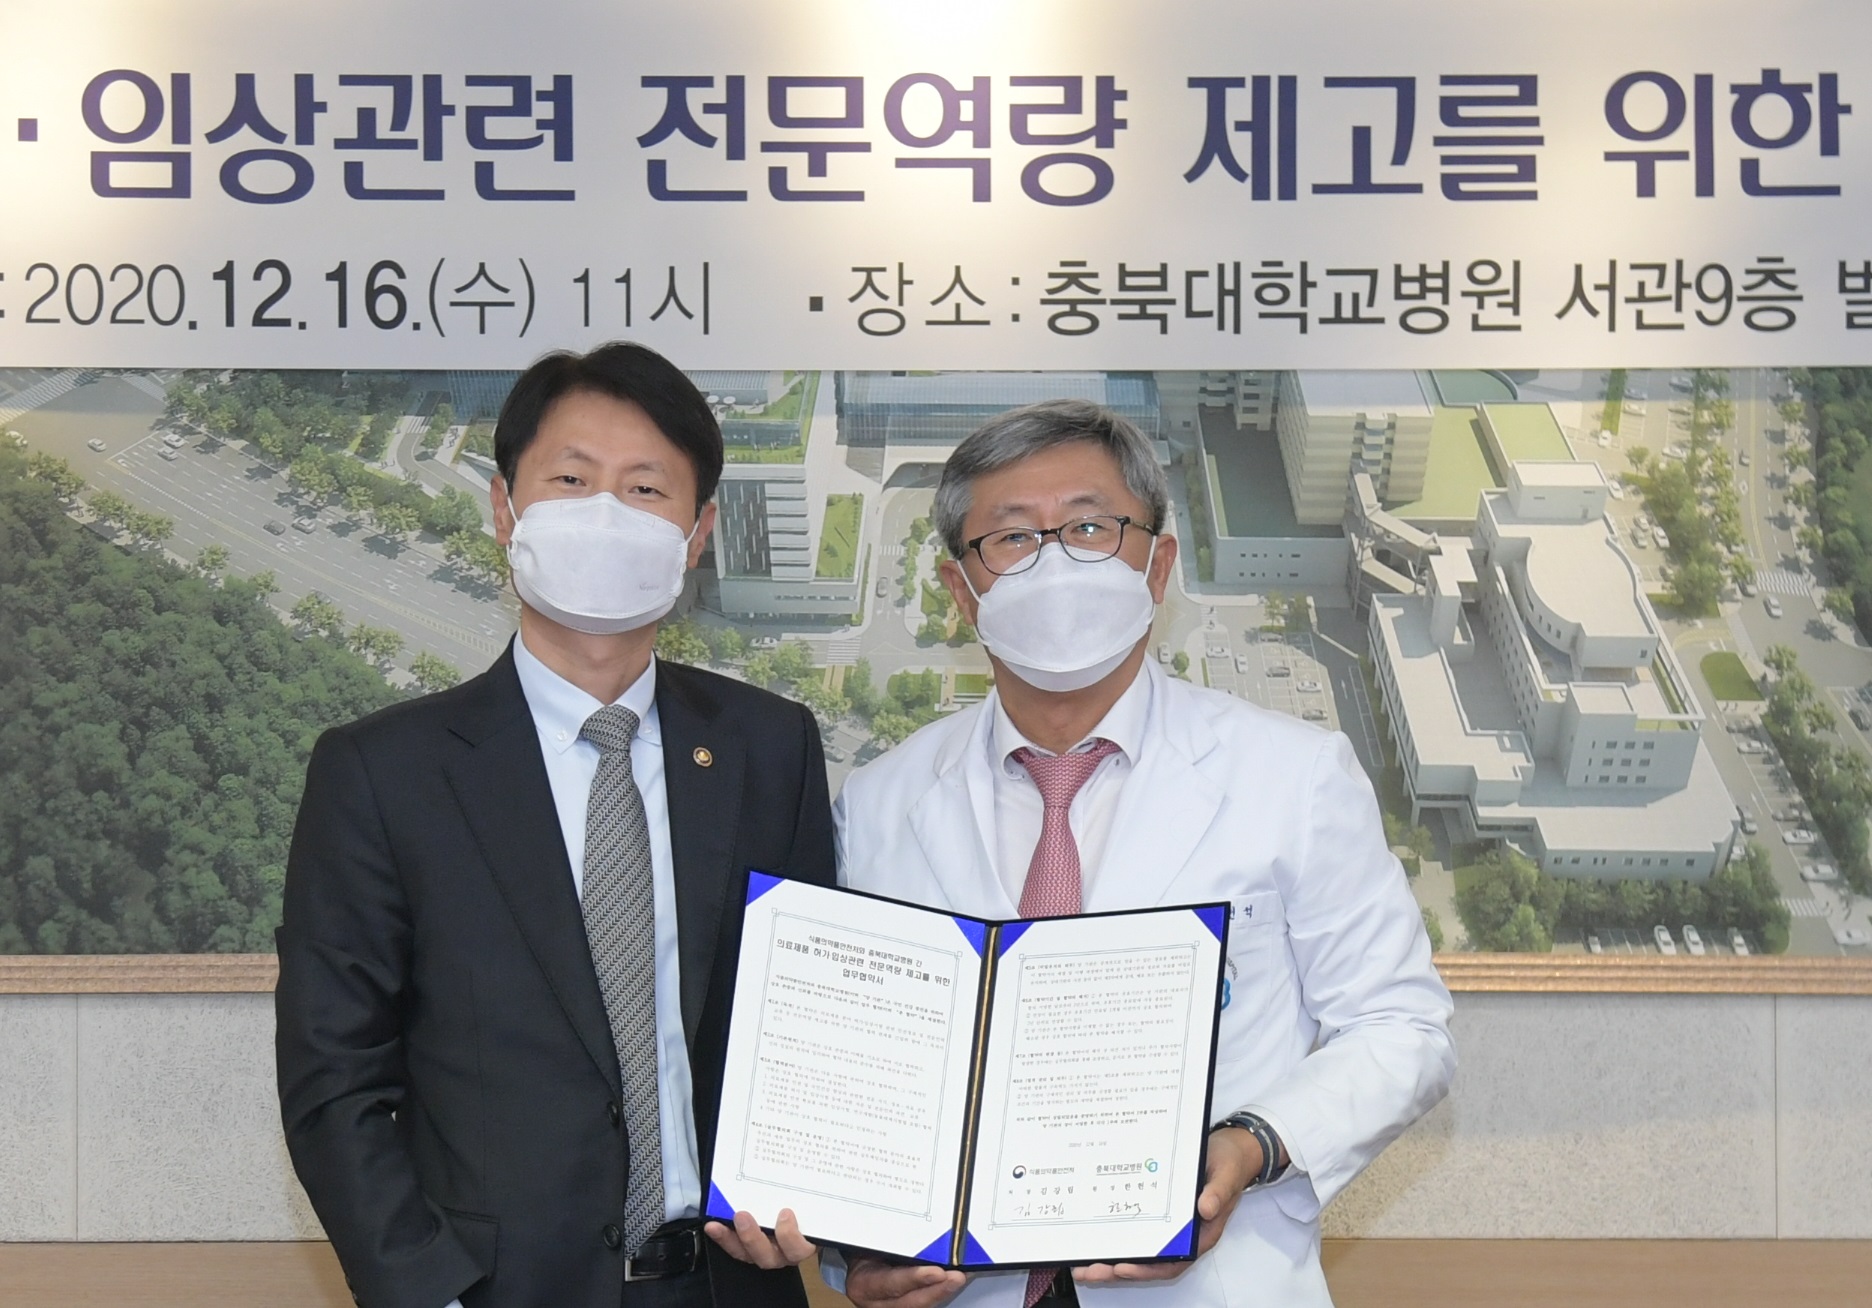 [Dec. 16, 2020] Business Agreement Signing Ceremony between the MFDS and Chungbuk National University Hospital